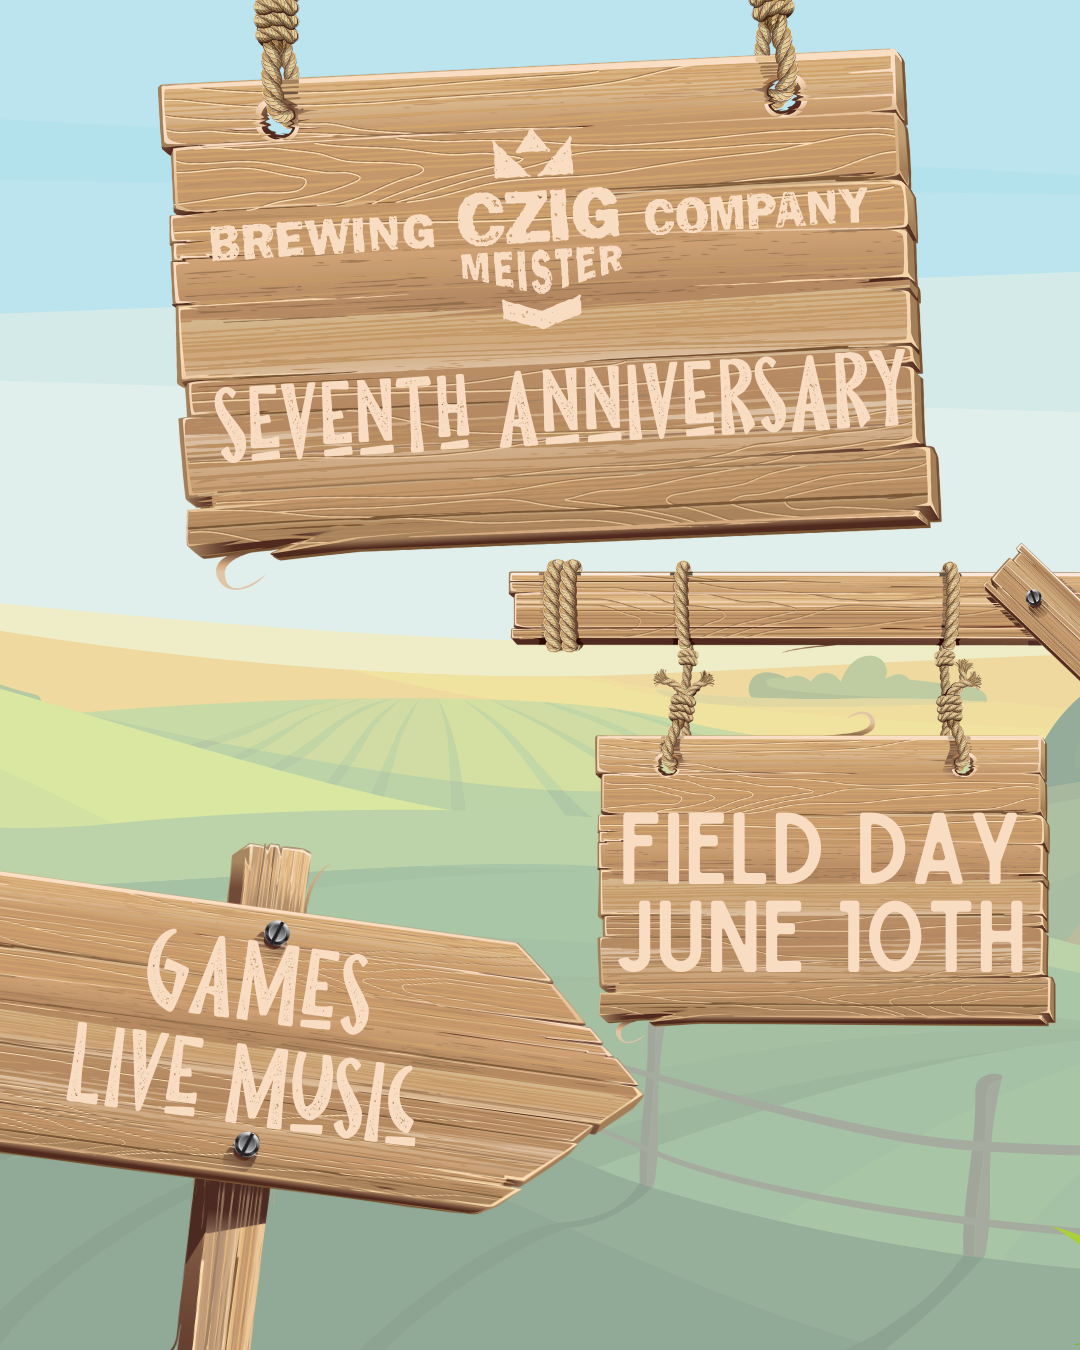 7th Anniversary and Field Day at Czig Meister Brewing Company on June 10th